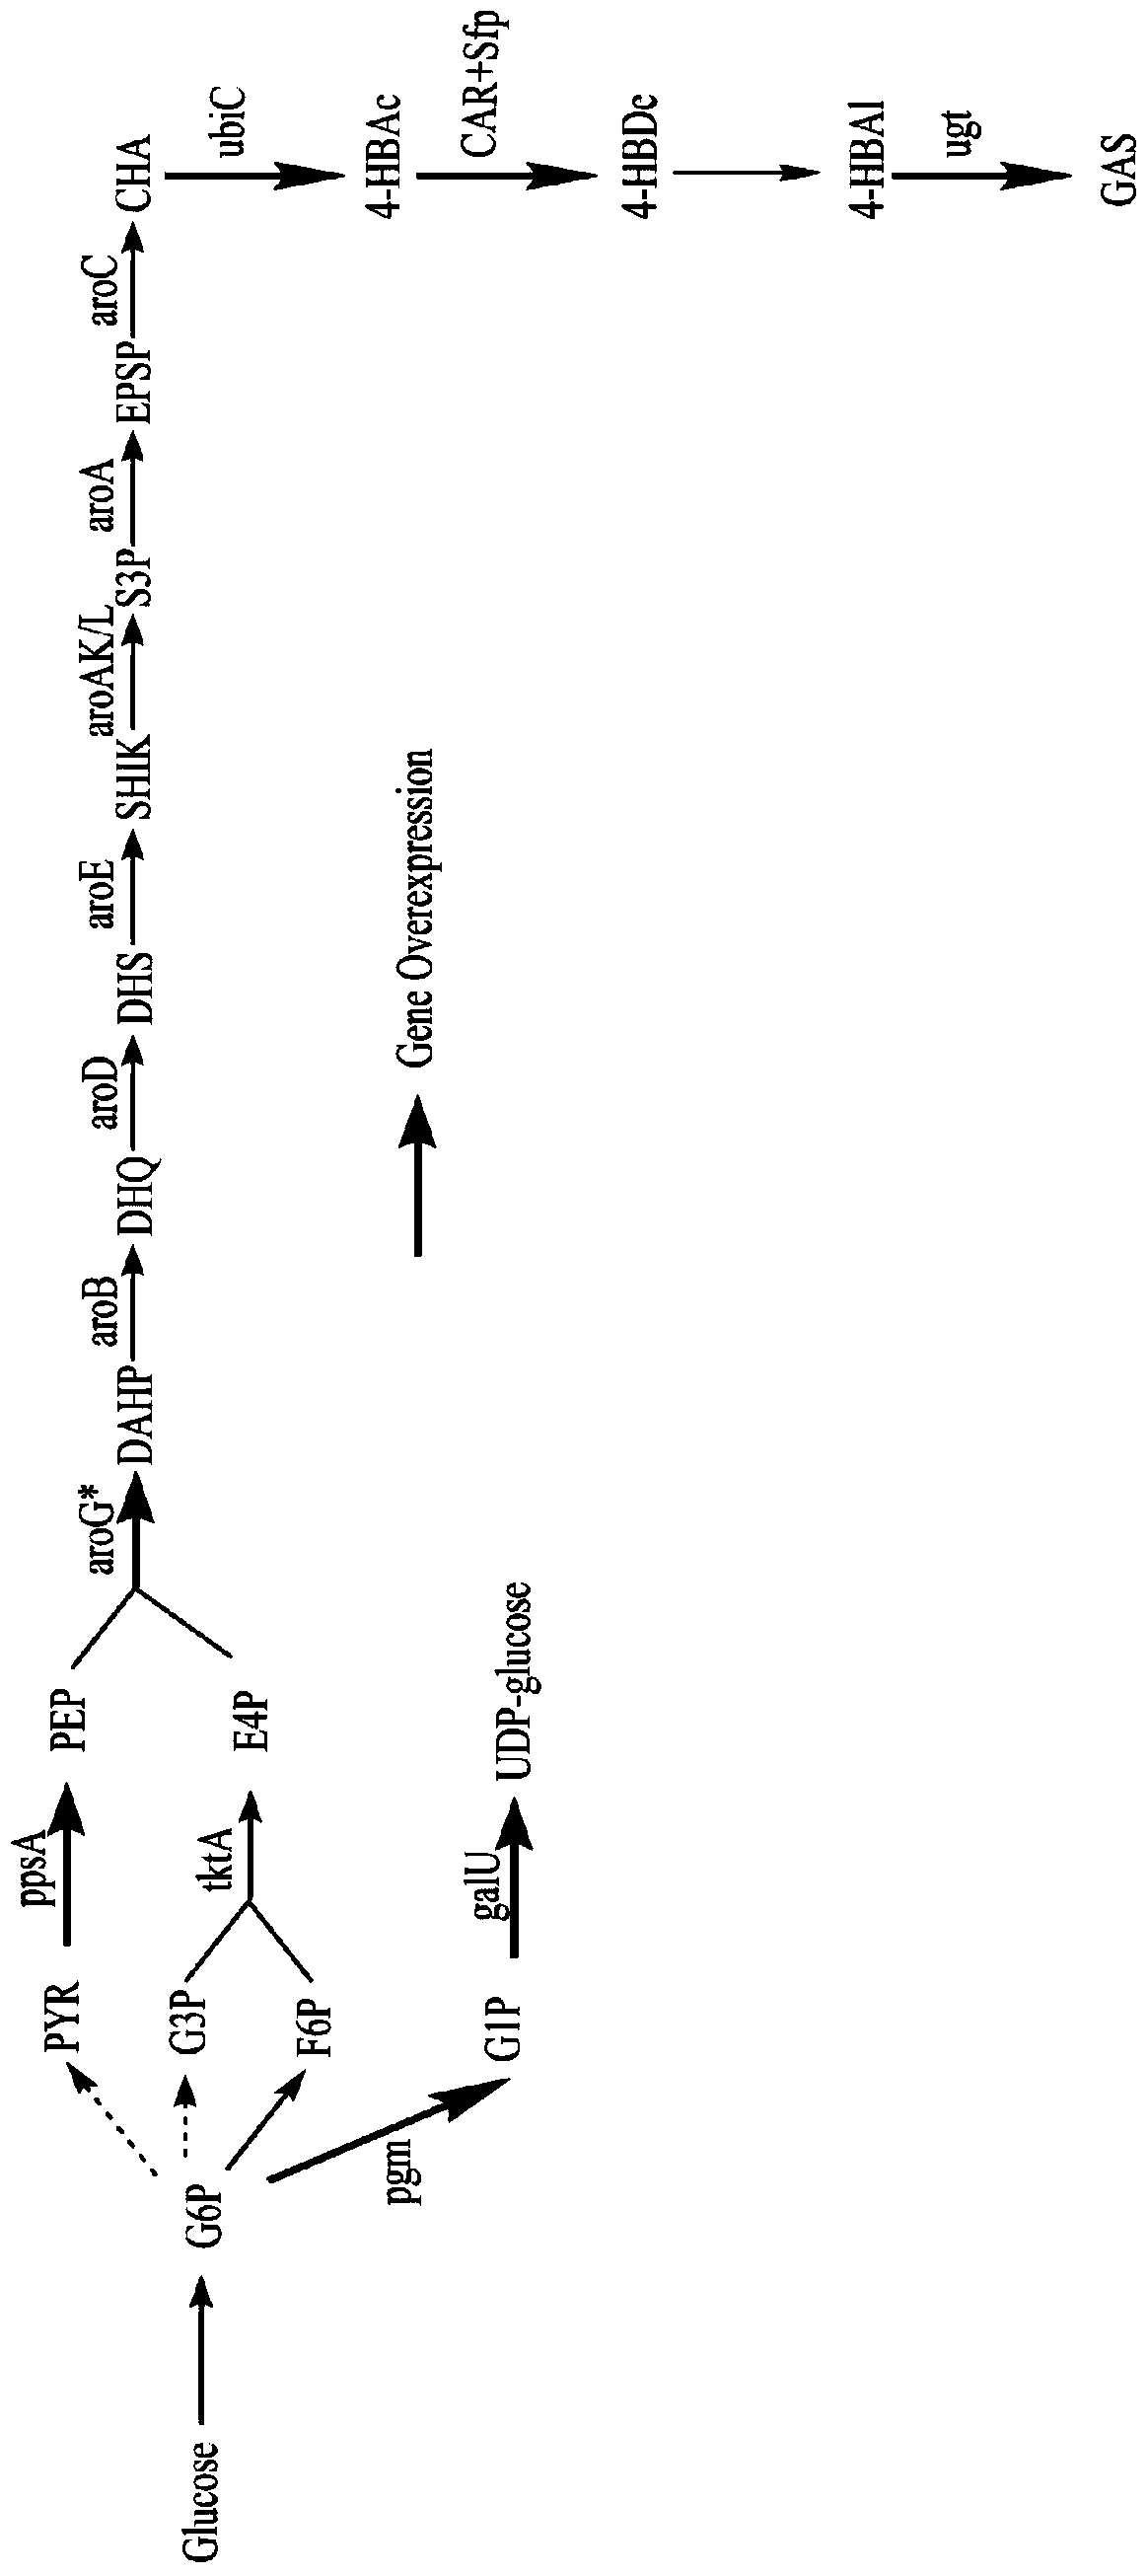 Recombinant Escherichia coli for producing p-hydroxybenzyl alcohol or gastrodin by using glucose and its application